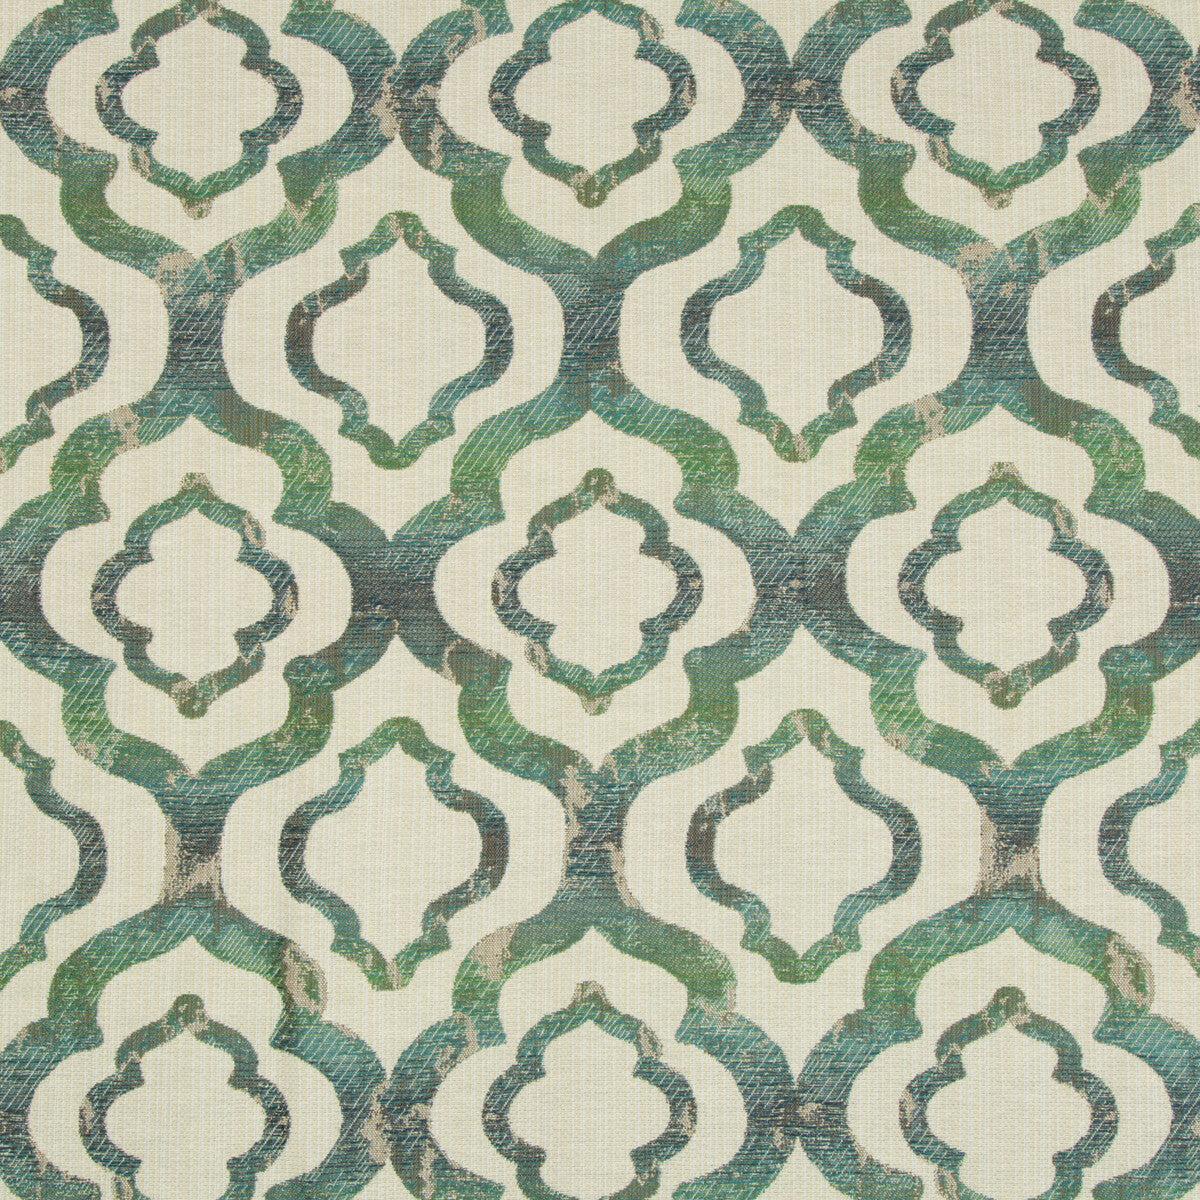 Kravet Design fabric in 34681-35 color - pattern 34681.35.0 - by Kravet Design in the Crypton Home collection